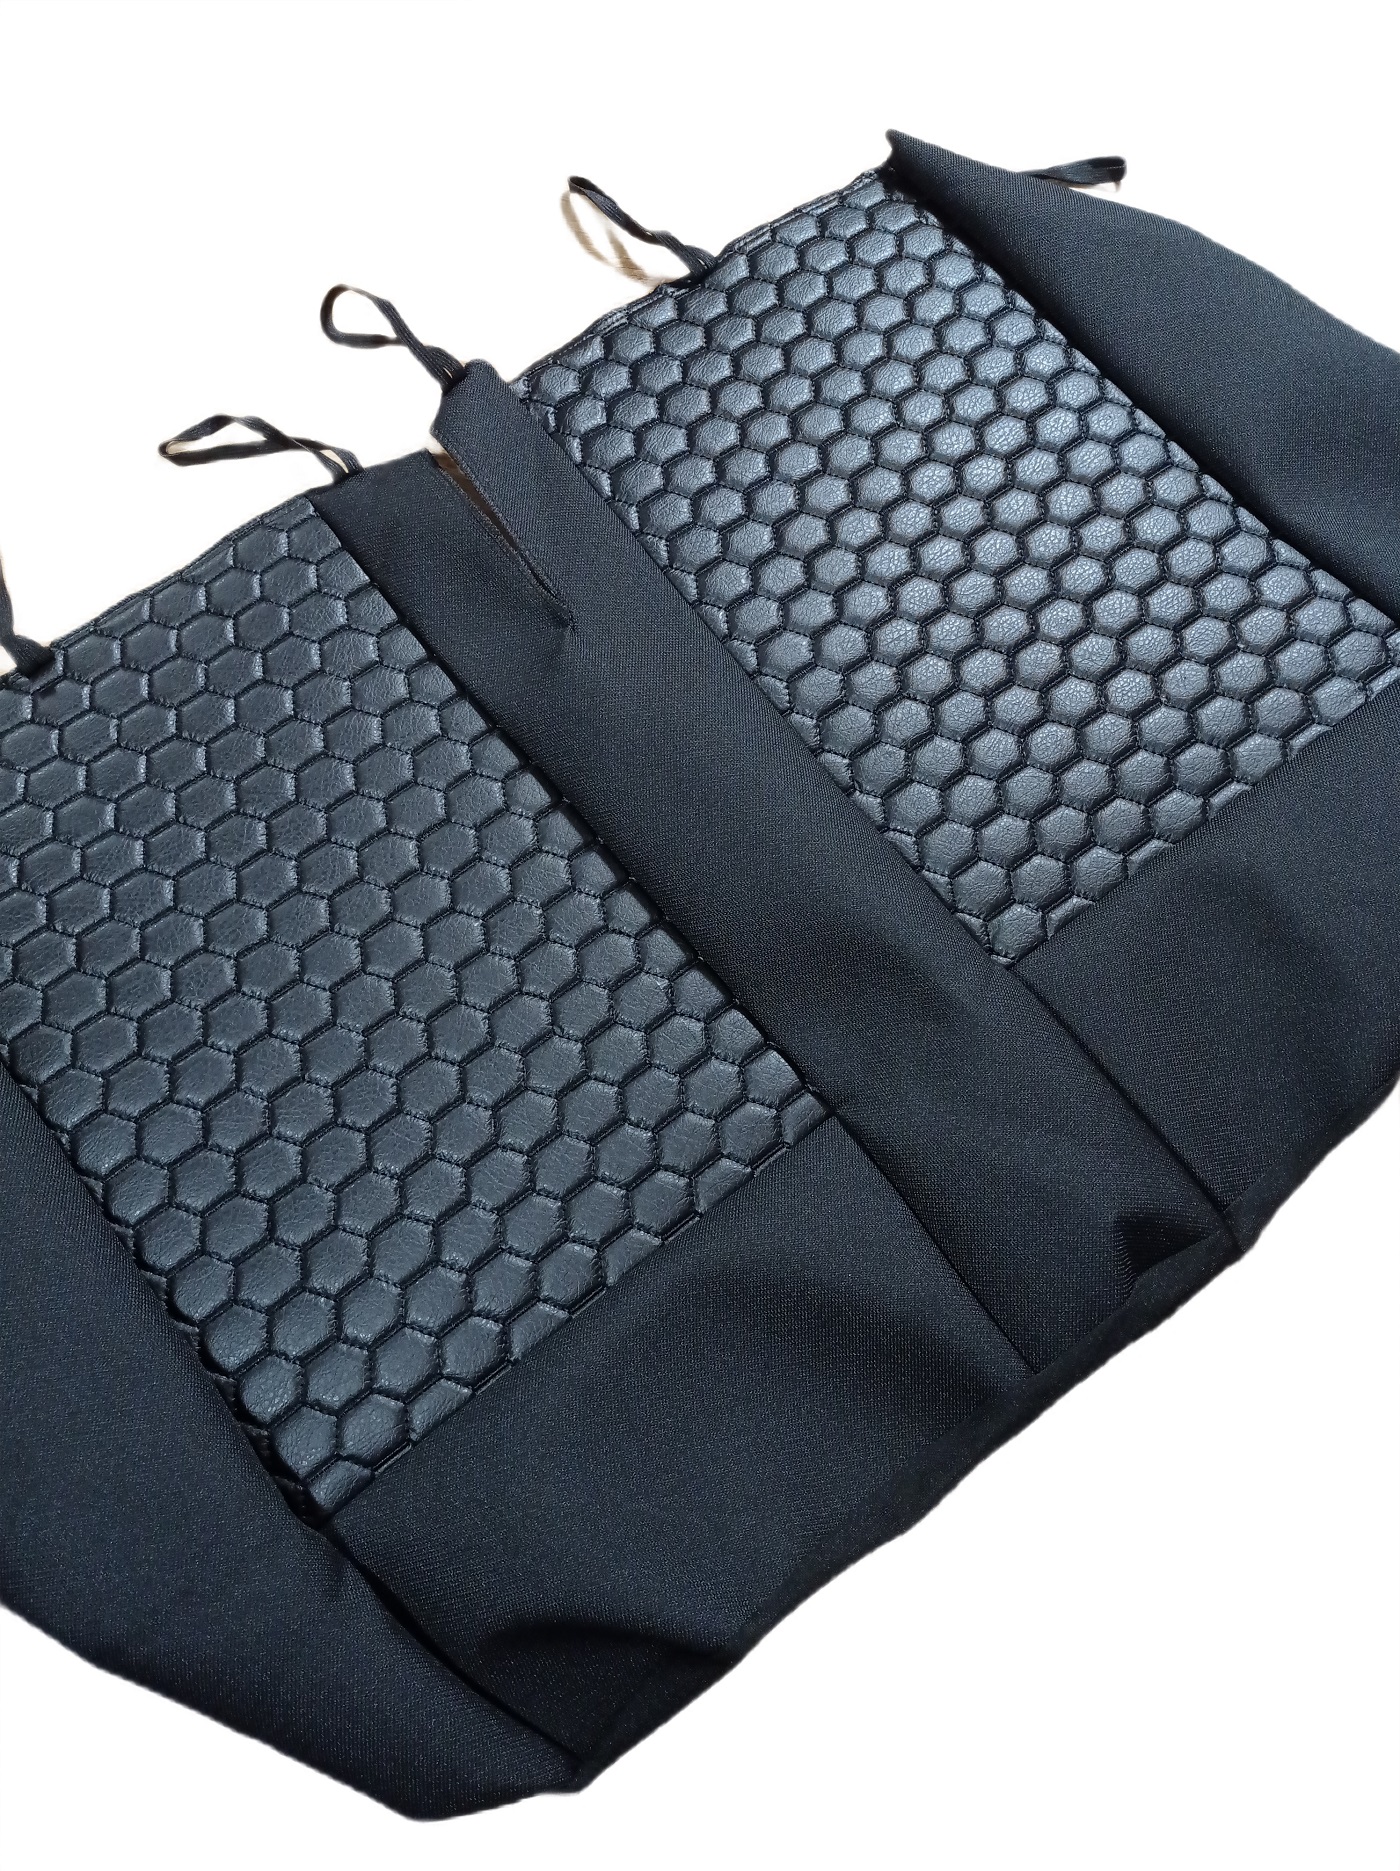 Seat covers for IVECO DAILY Van Black Leather